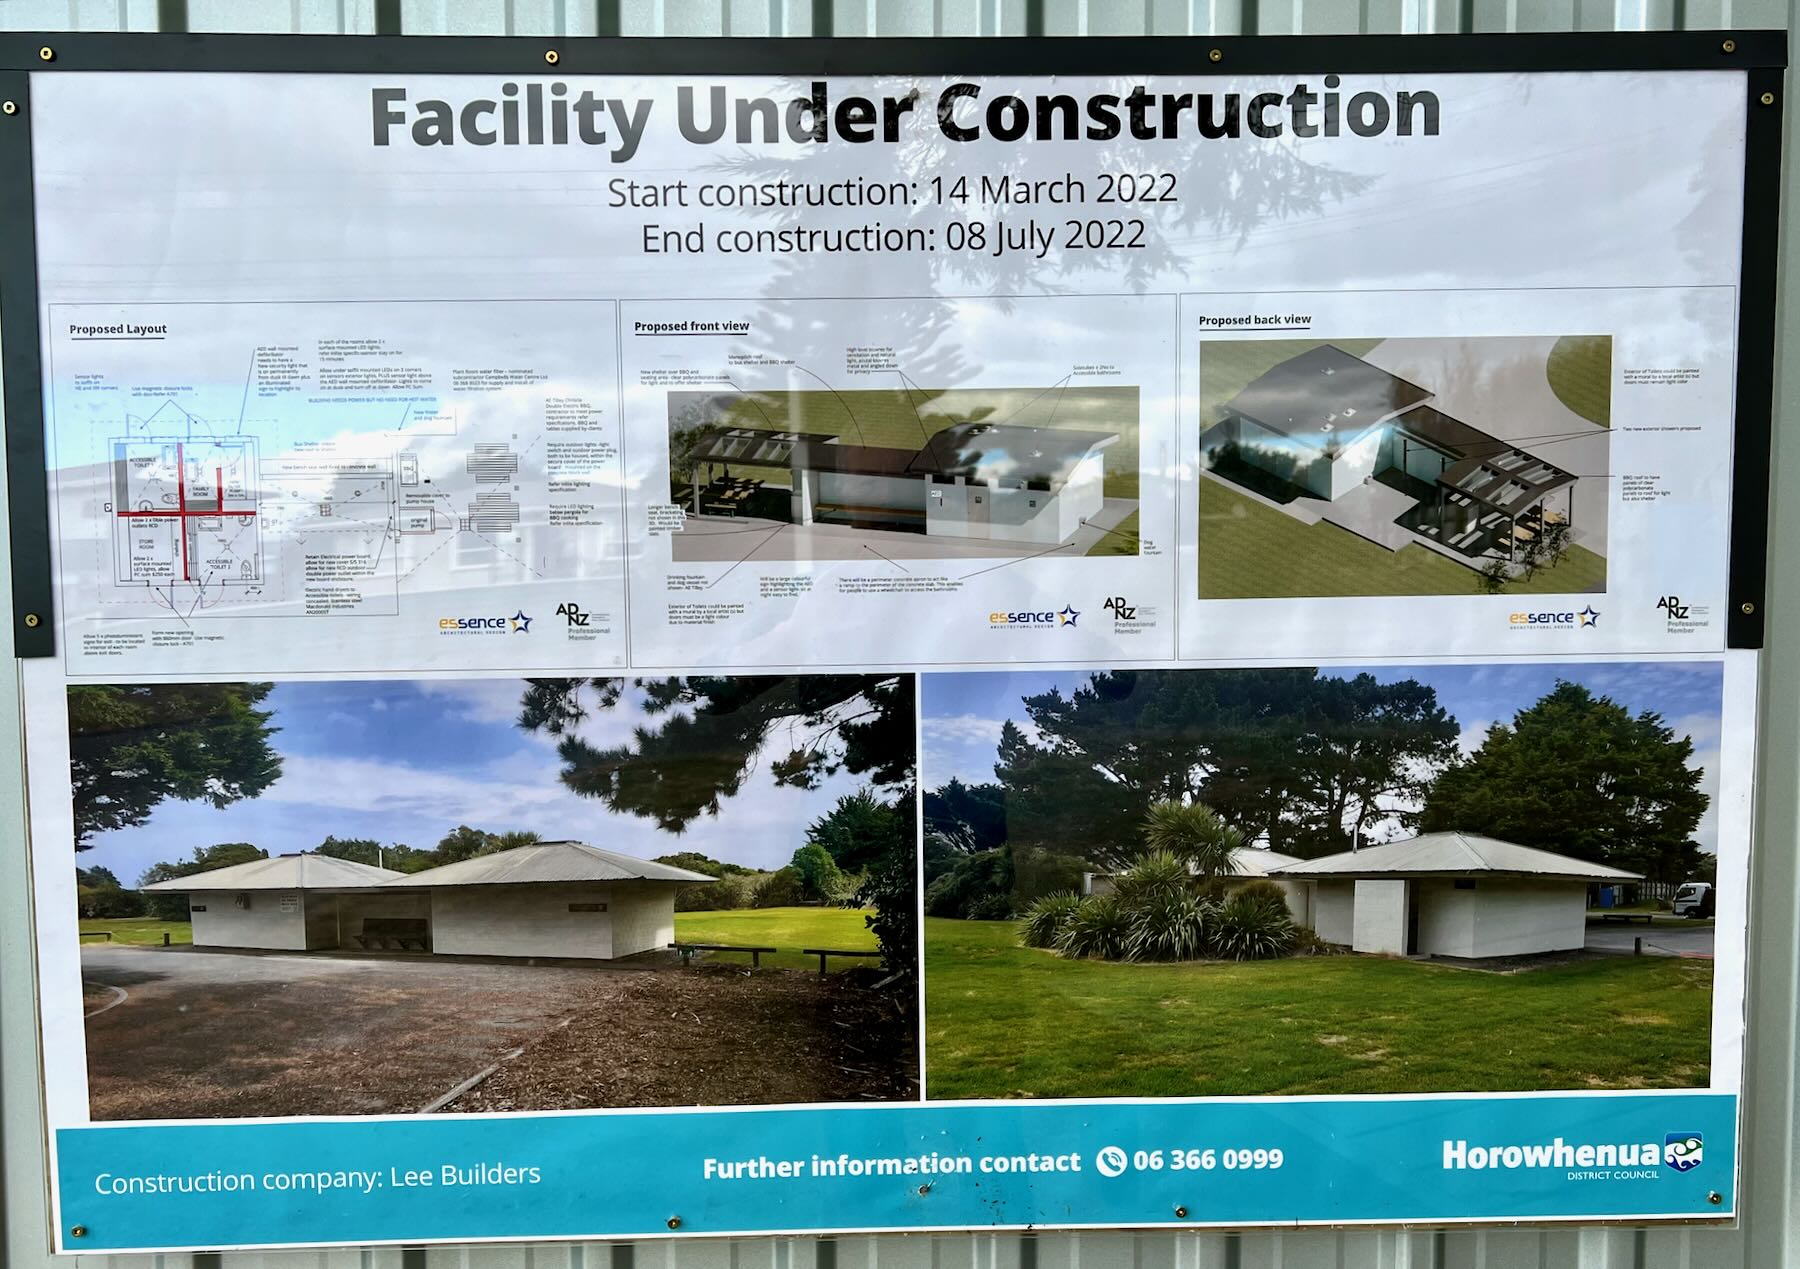 Facility Under Construction poster.